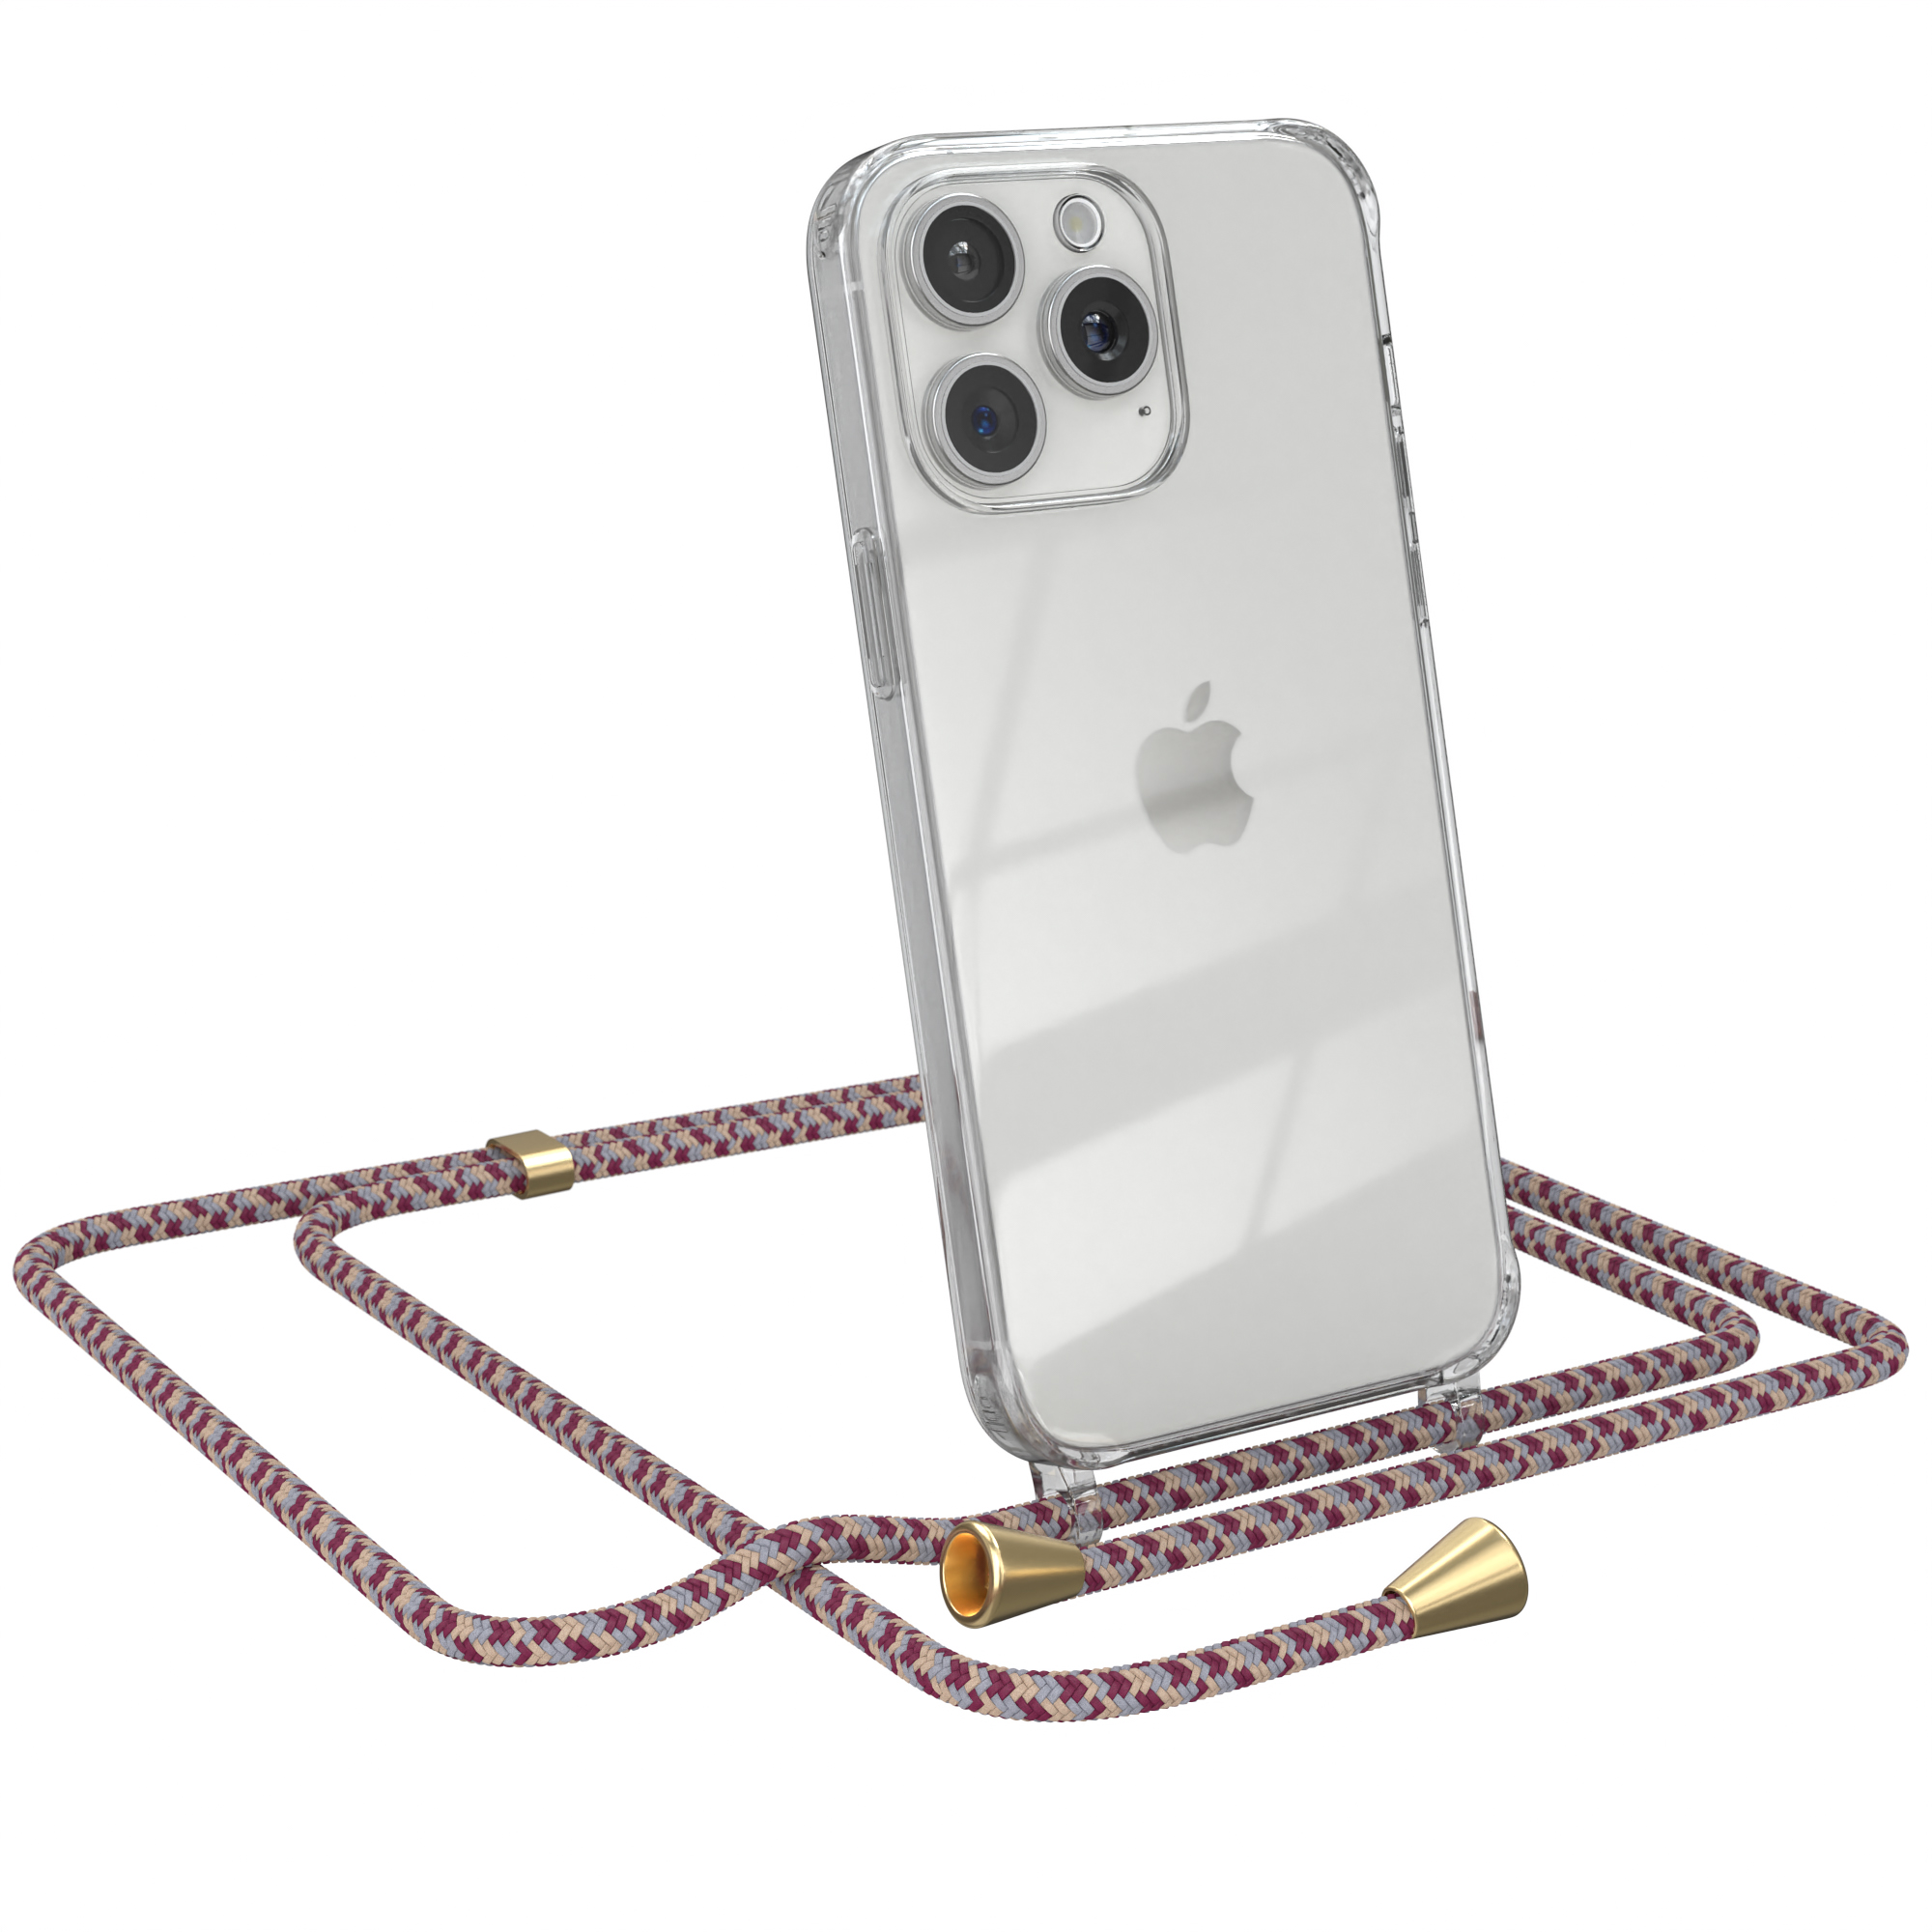 mit Cover iPhone Umhängetasche, Clear Pro Clips / Umhängeband, CASE 15 Max, Beige Apple, Rot Camouflage Gold EAZY